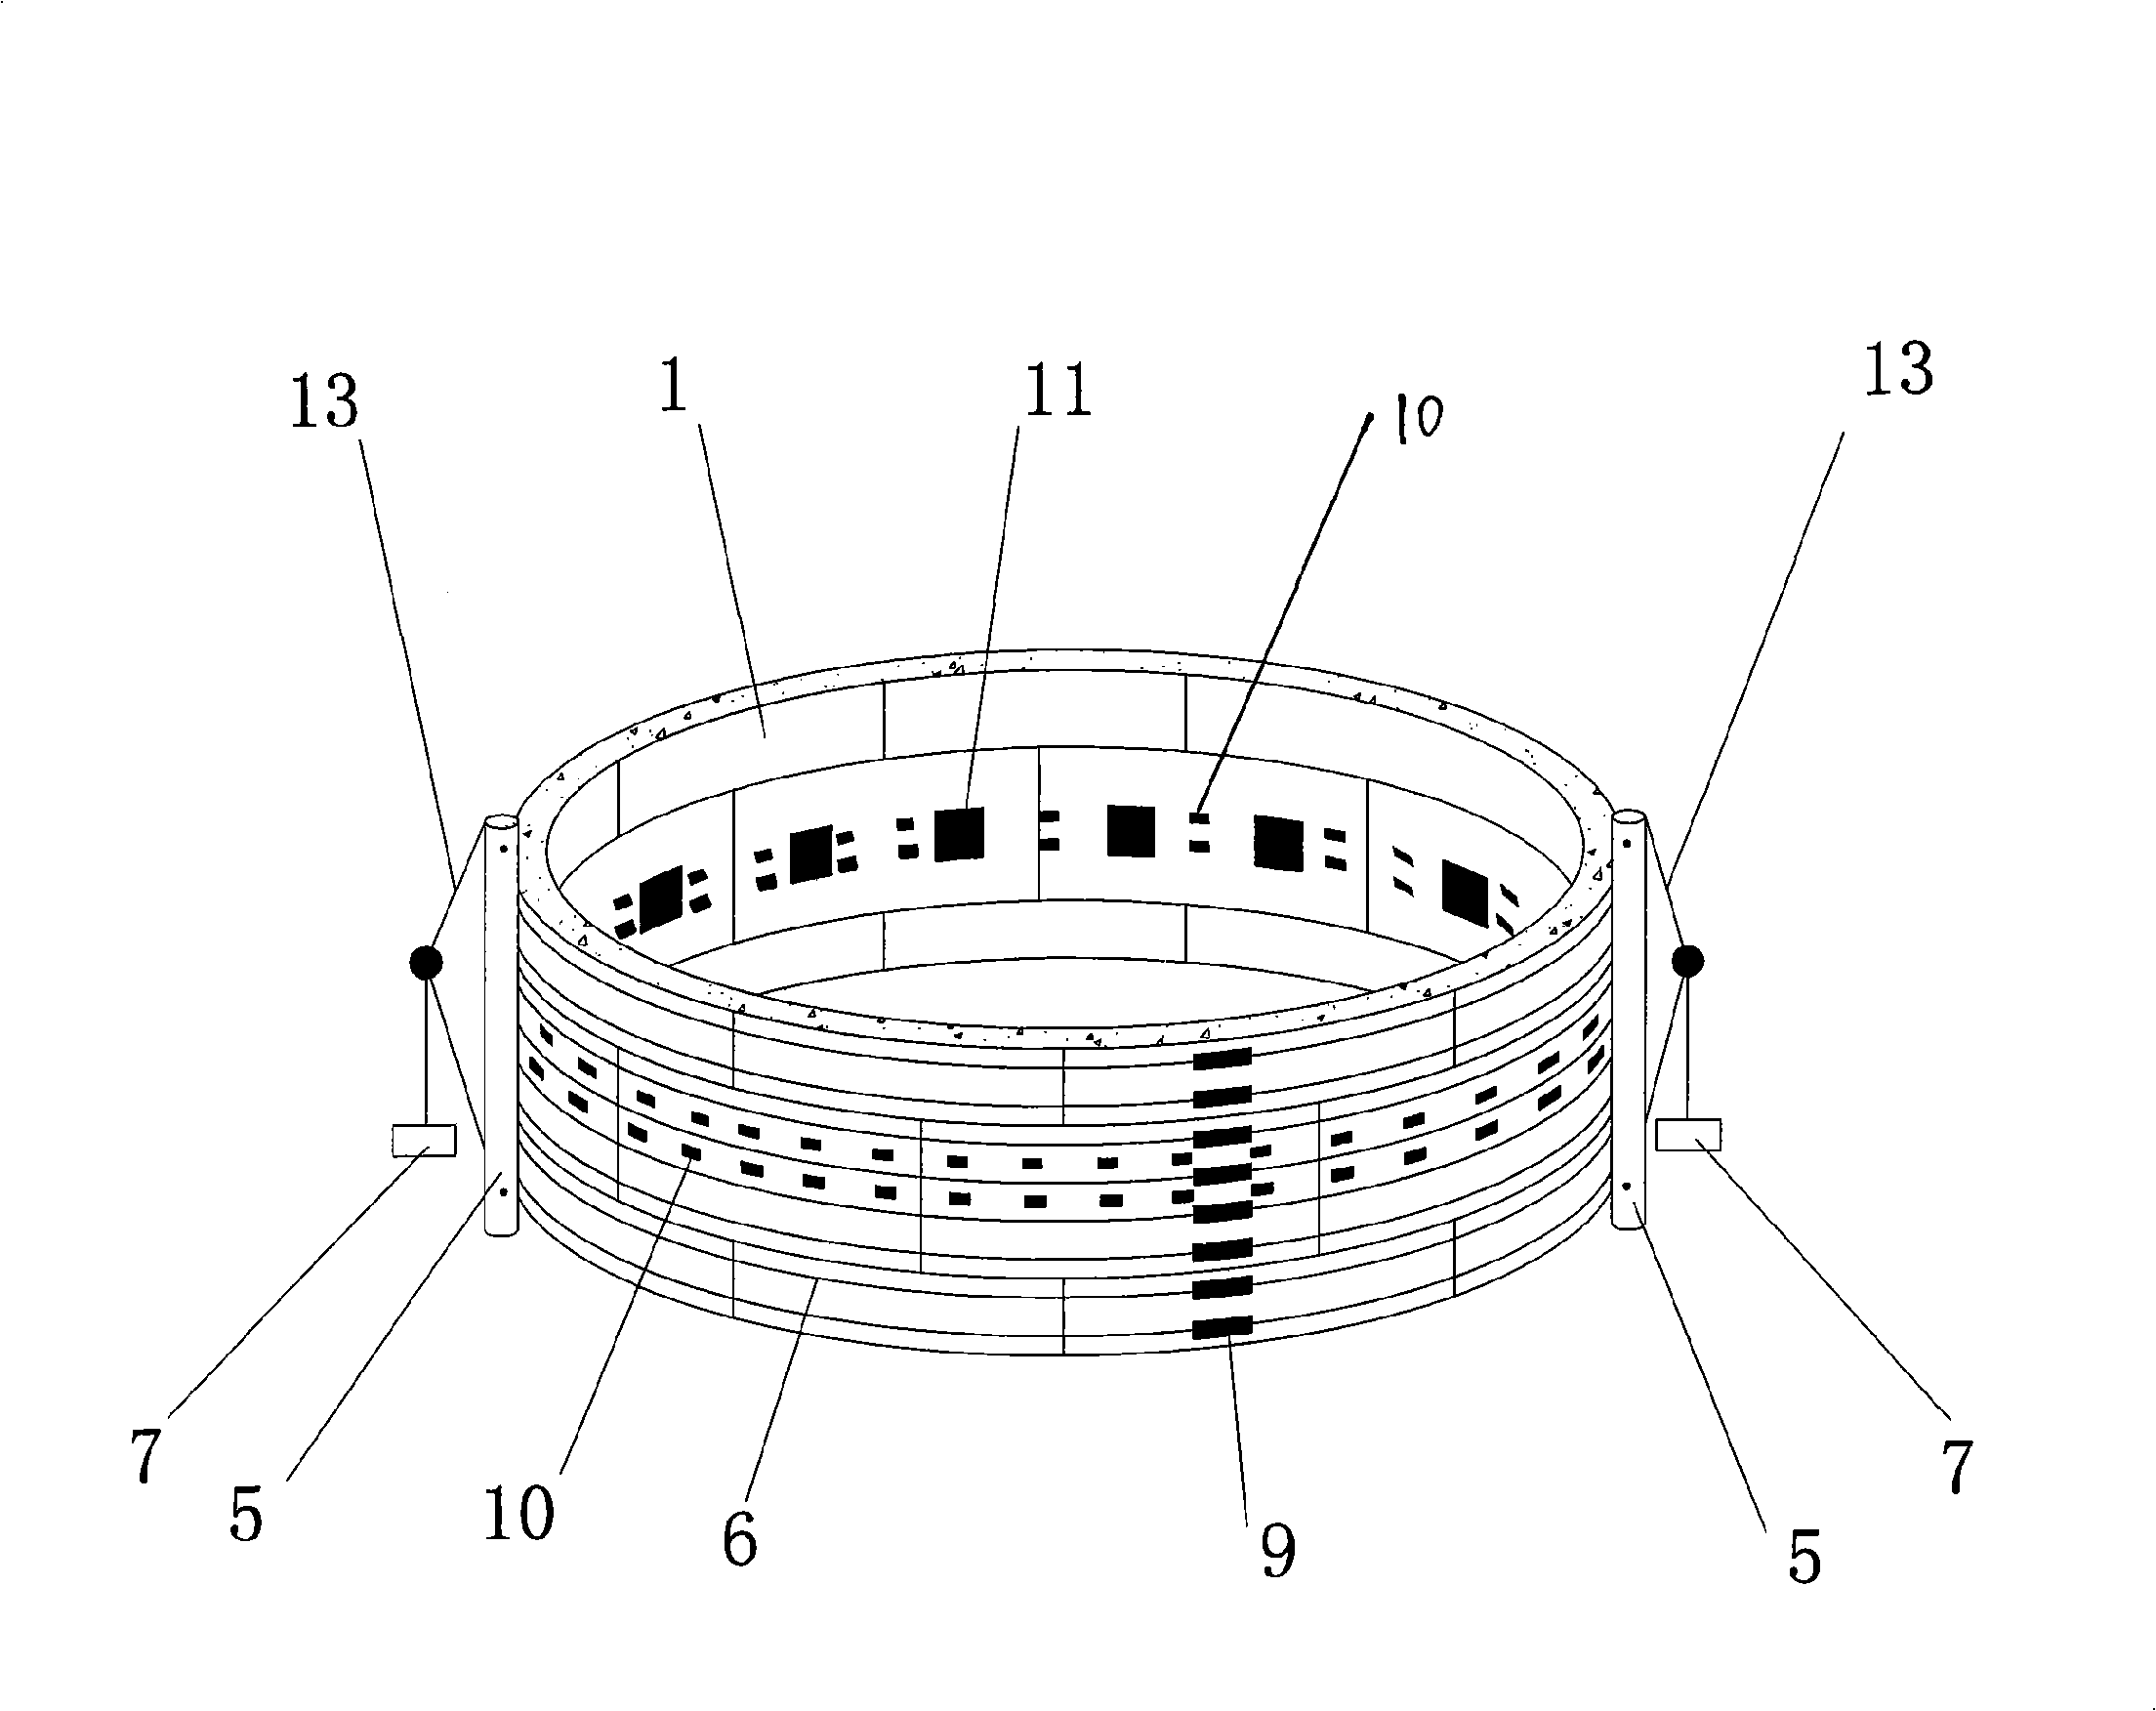 Hydraulic analogue method of shield tunneling structure model